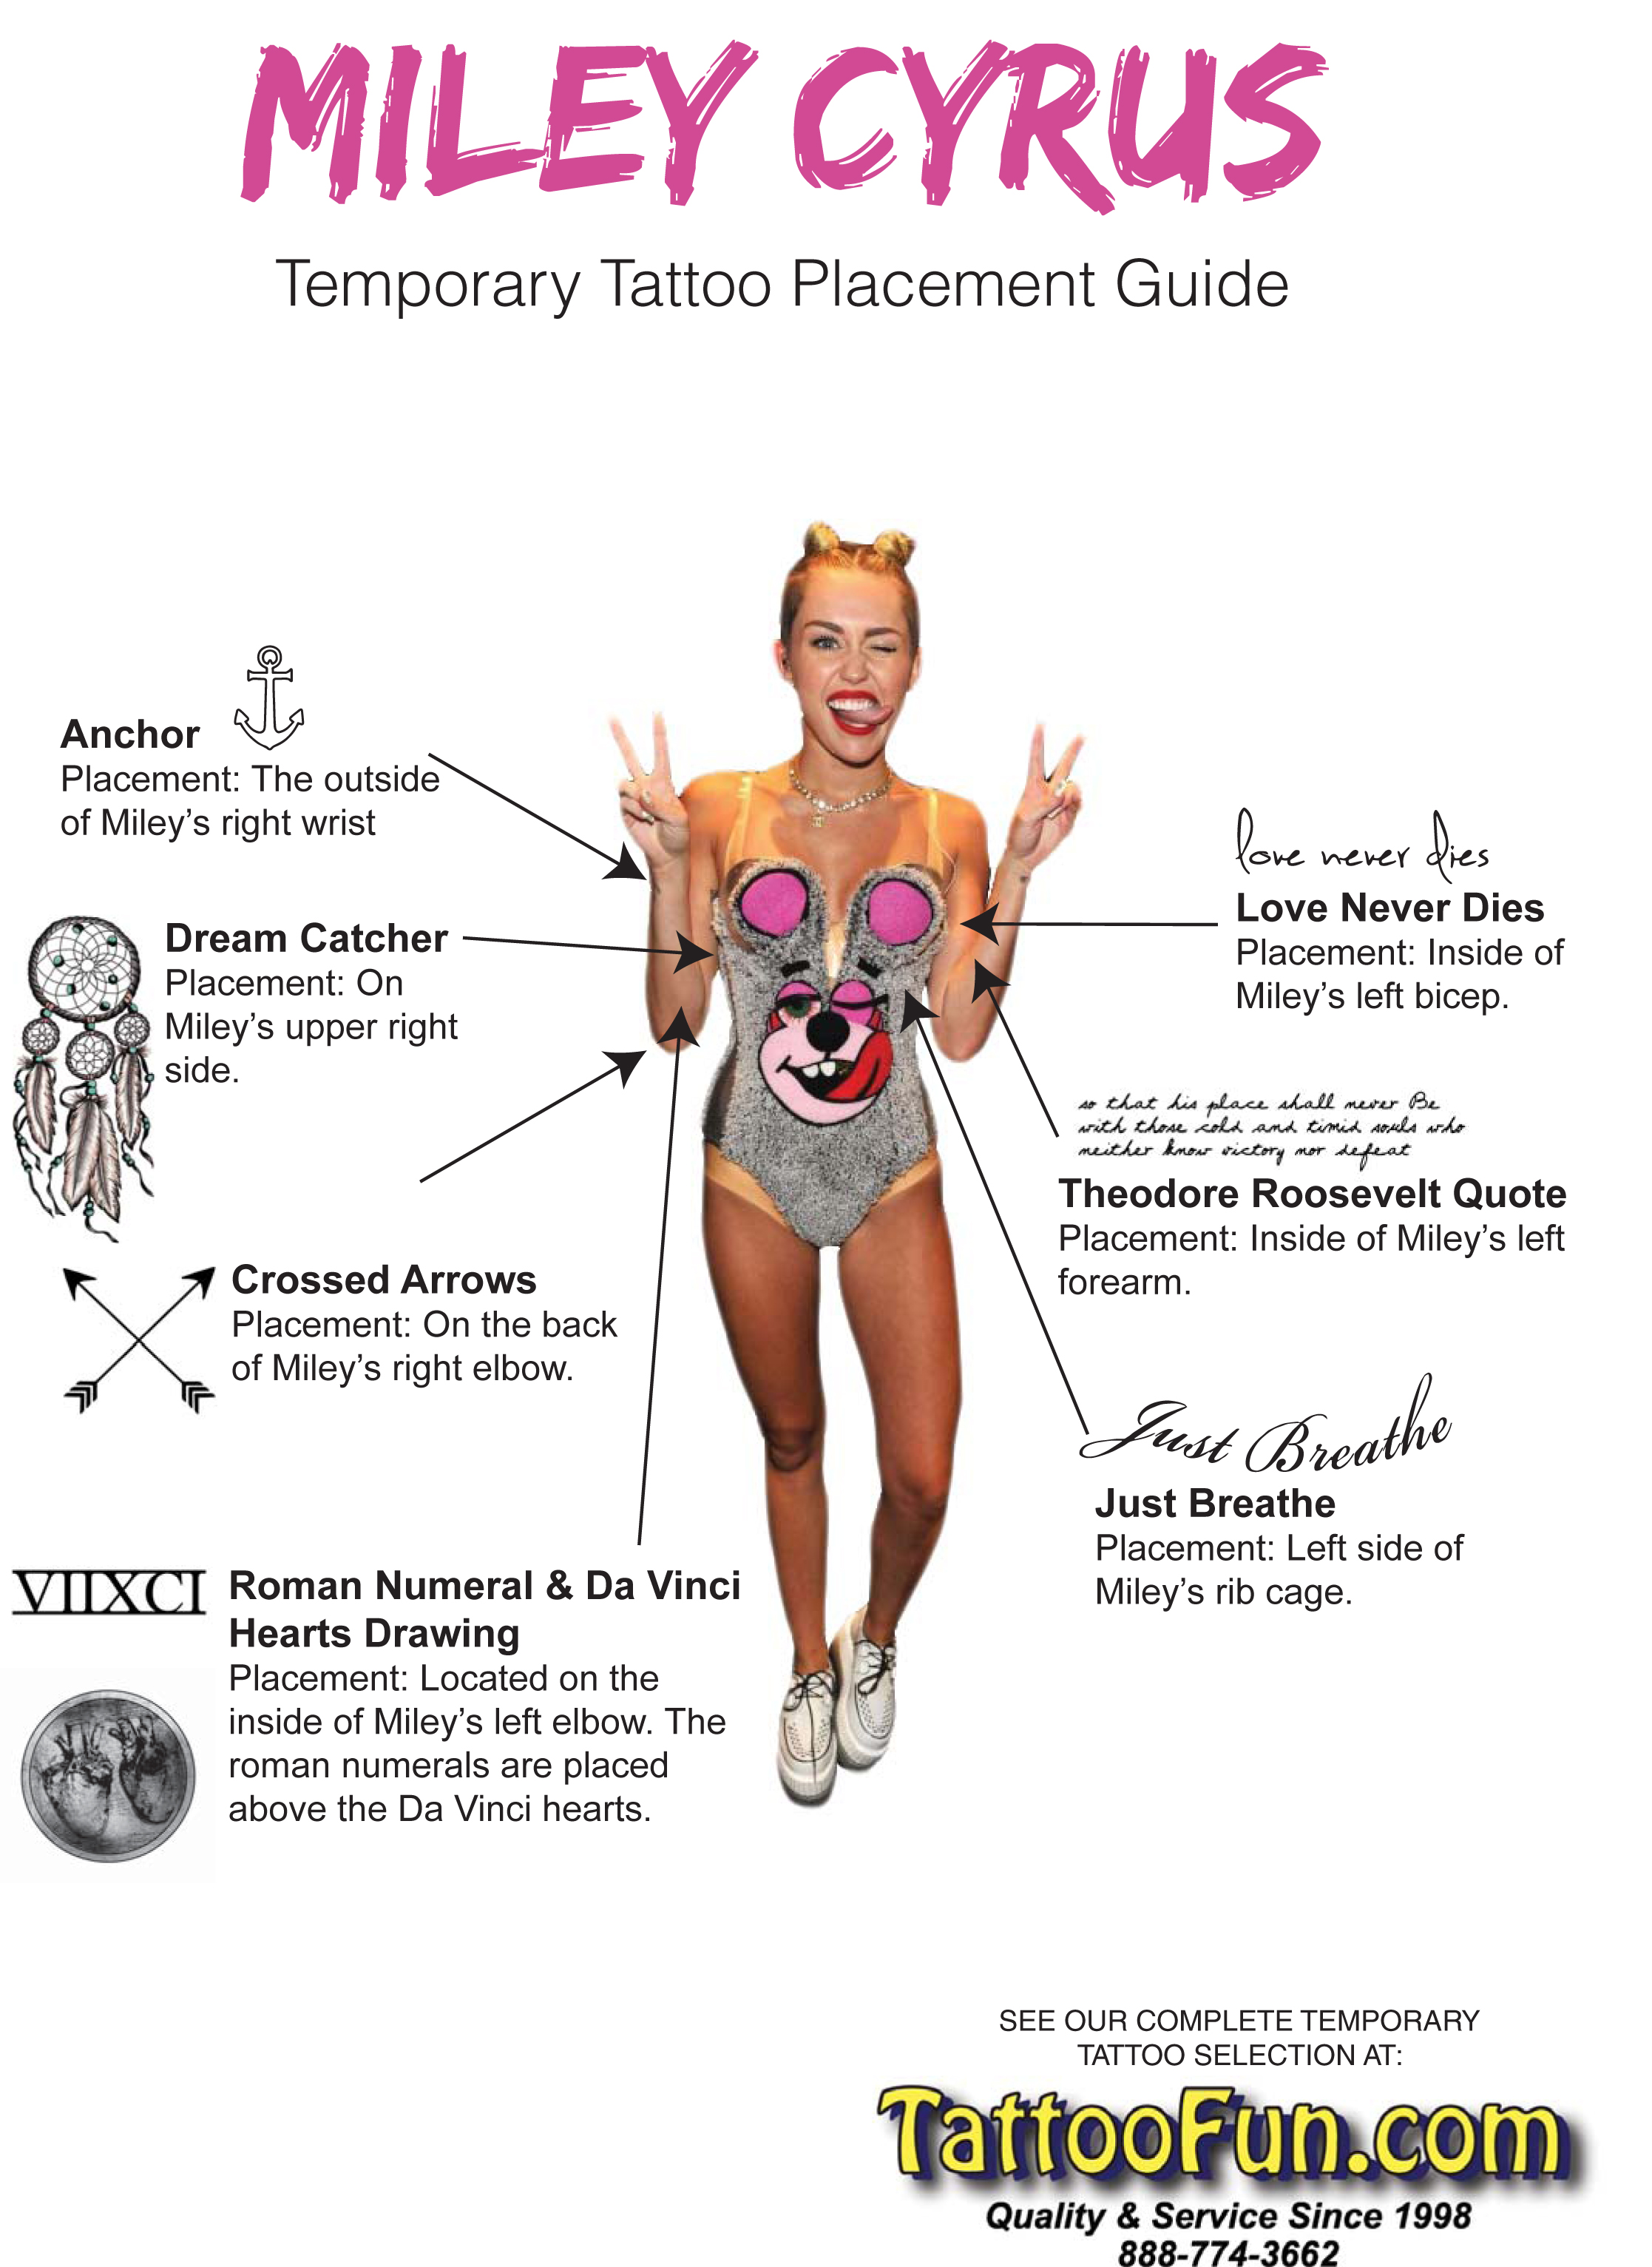 Miley Cyrus Temporary Tattoos placement guide